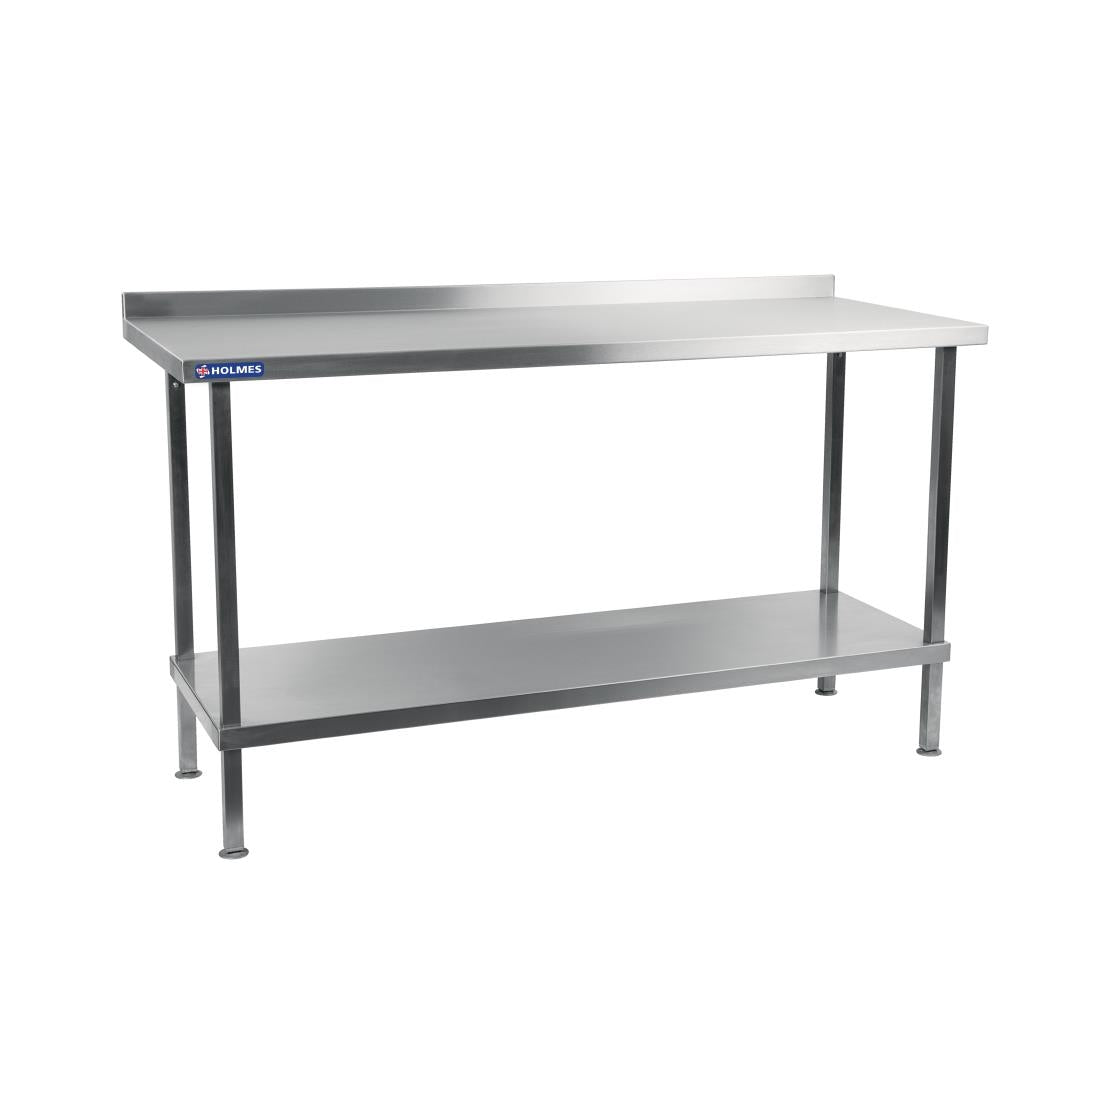 DR024 Holmes Stainless Steel Wall Table with Upstand 1800mm JD Catering Equipment Solutions Ltd